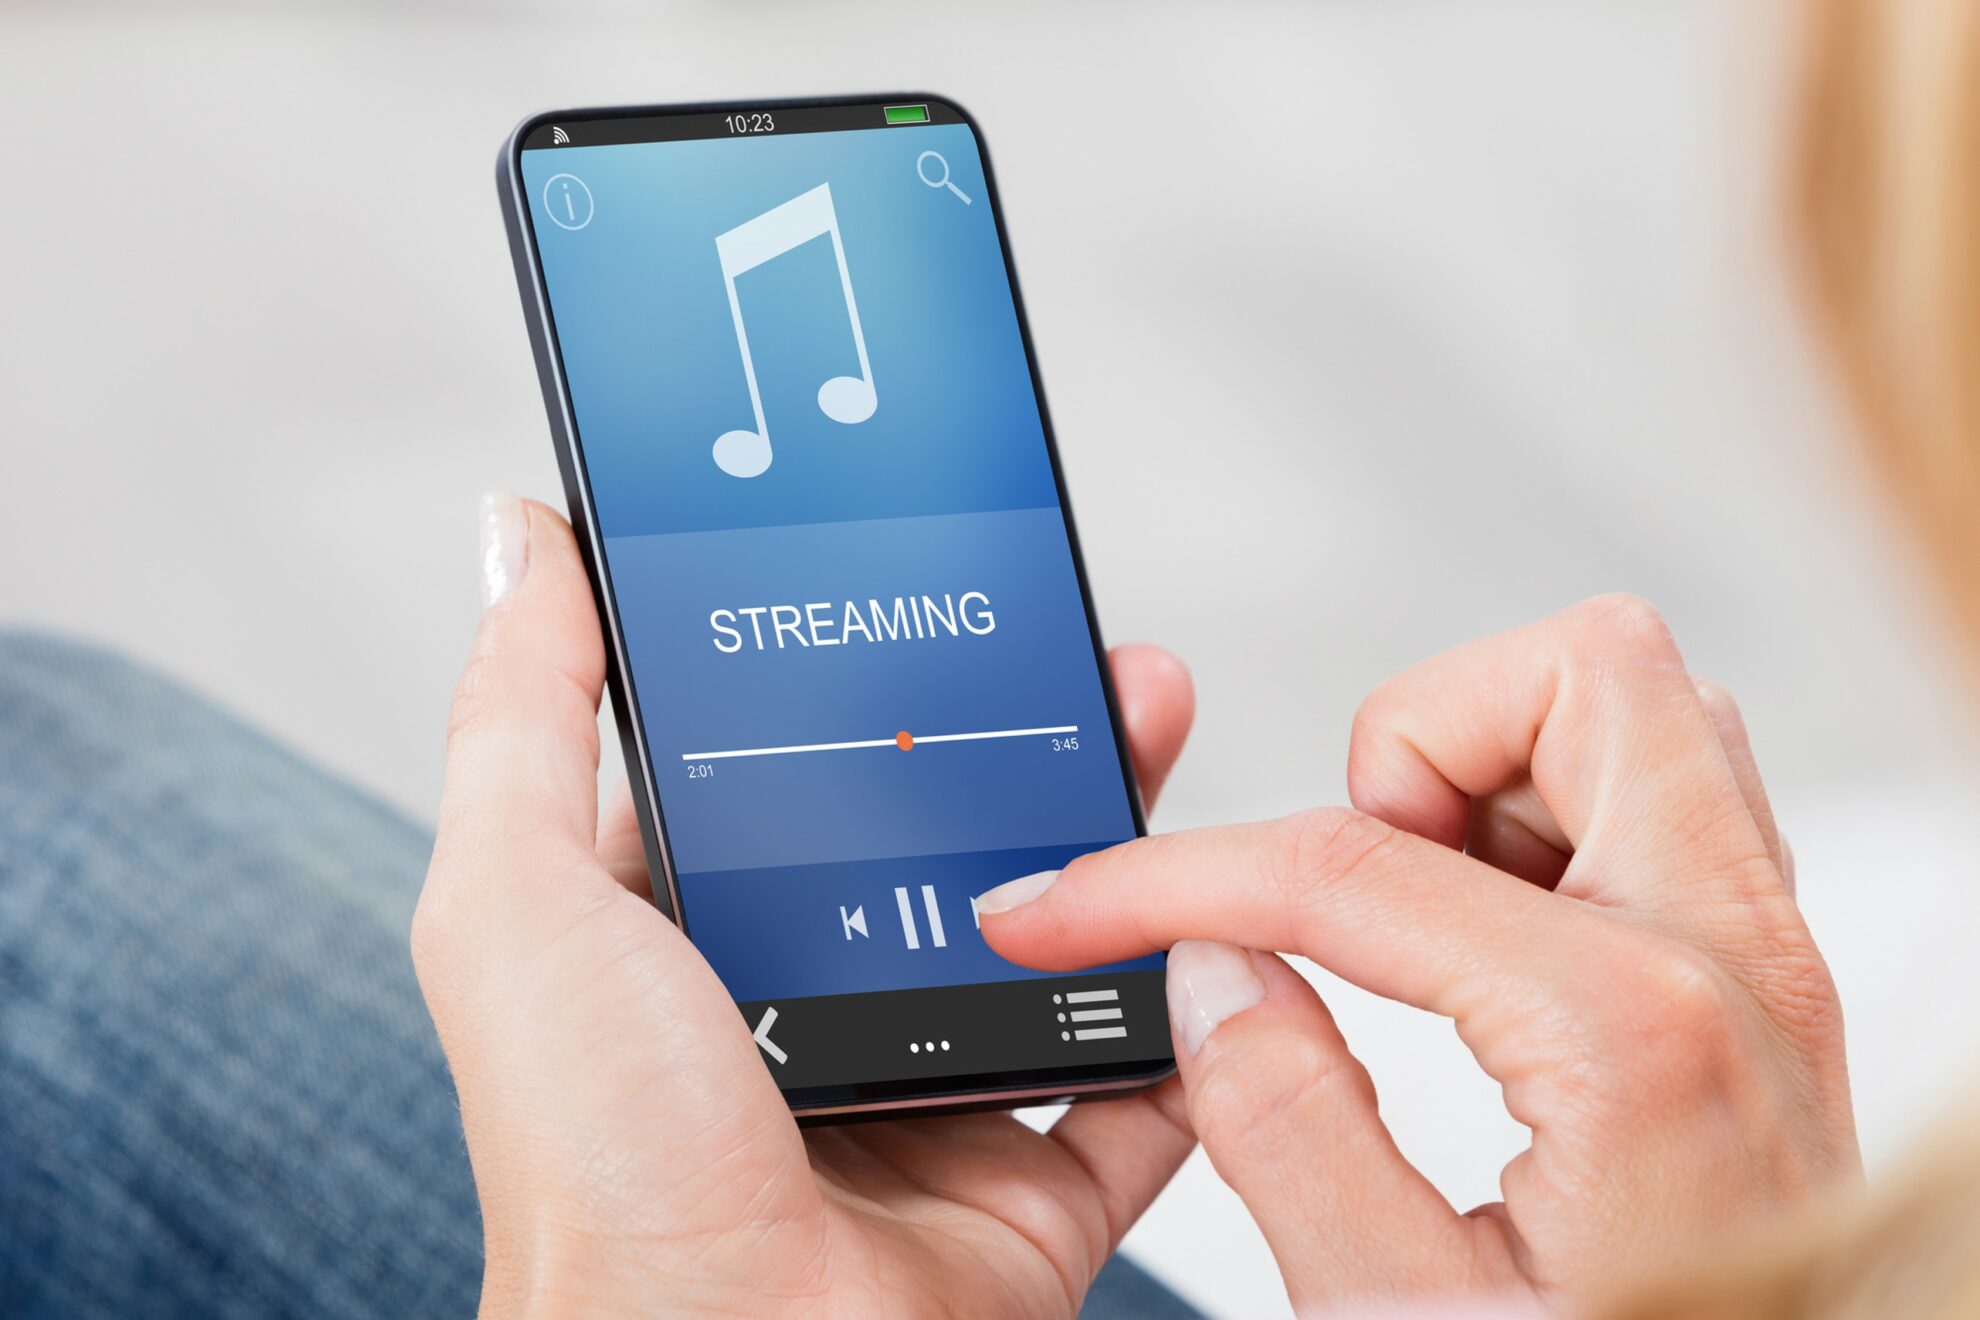 3 Reasons to Buy a Music Streamer